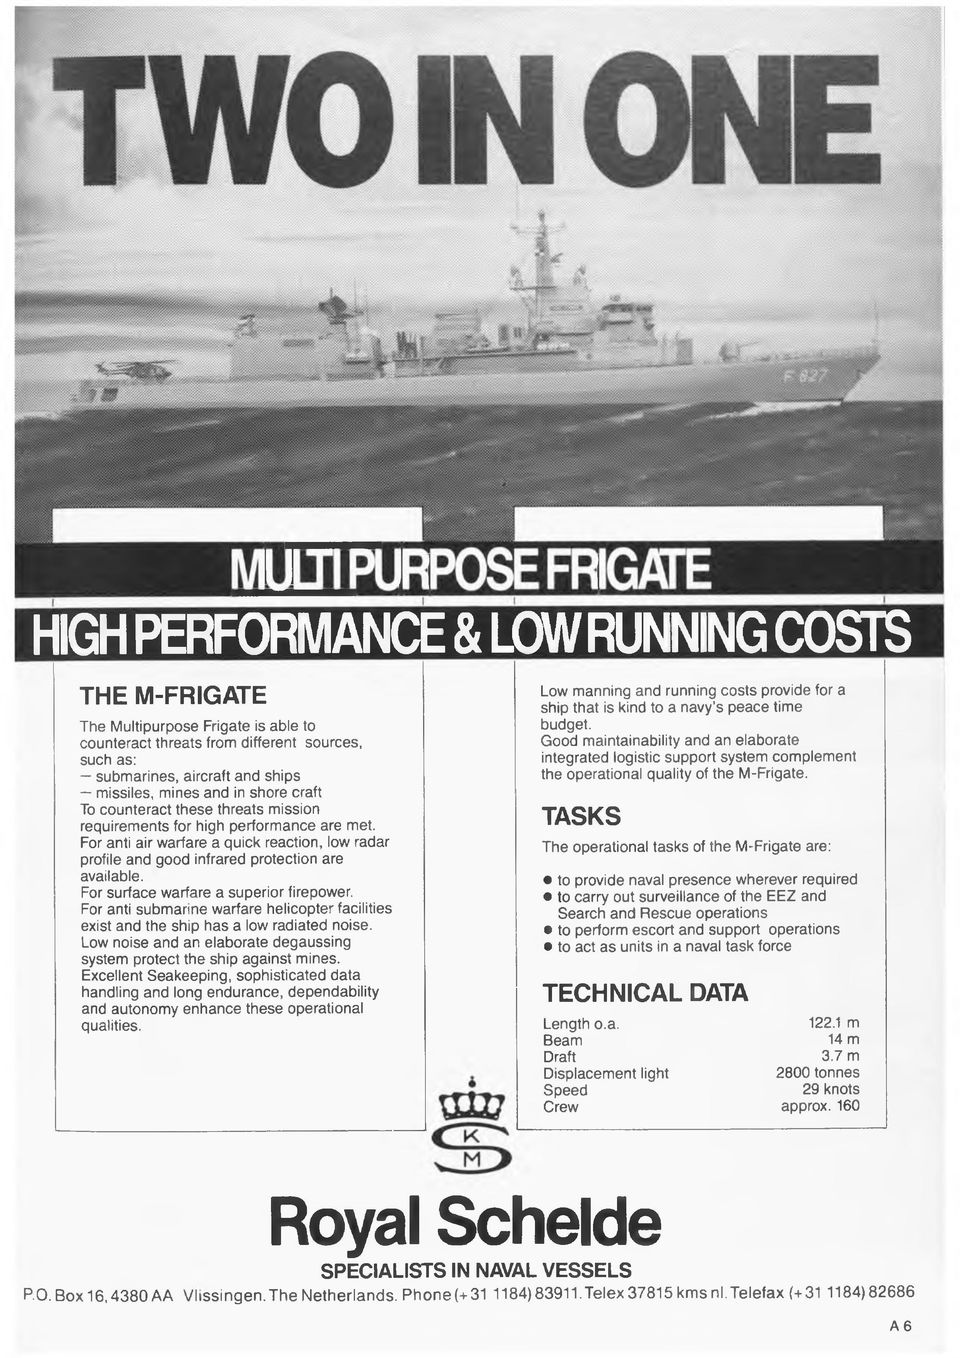 For surface warfare a superior firepower. For anti submarine warfare helicopter facilities exist and the ship has a low radiated noise.